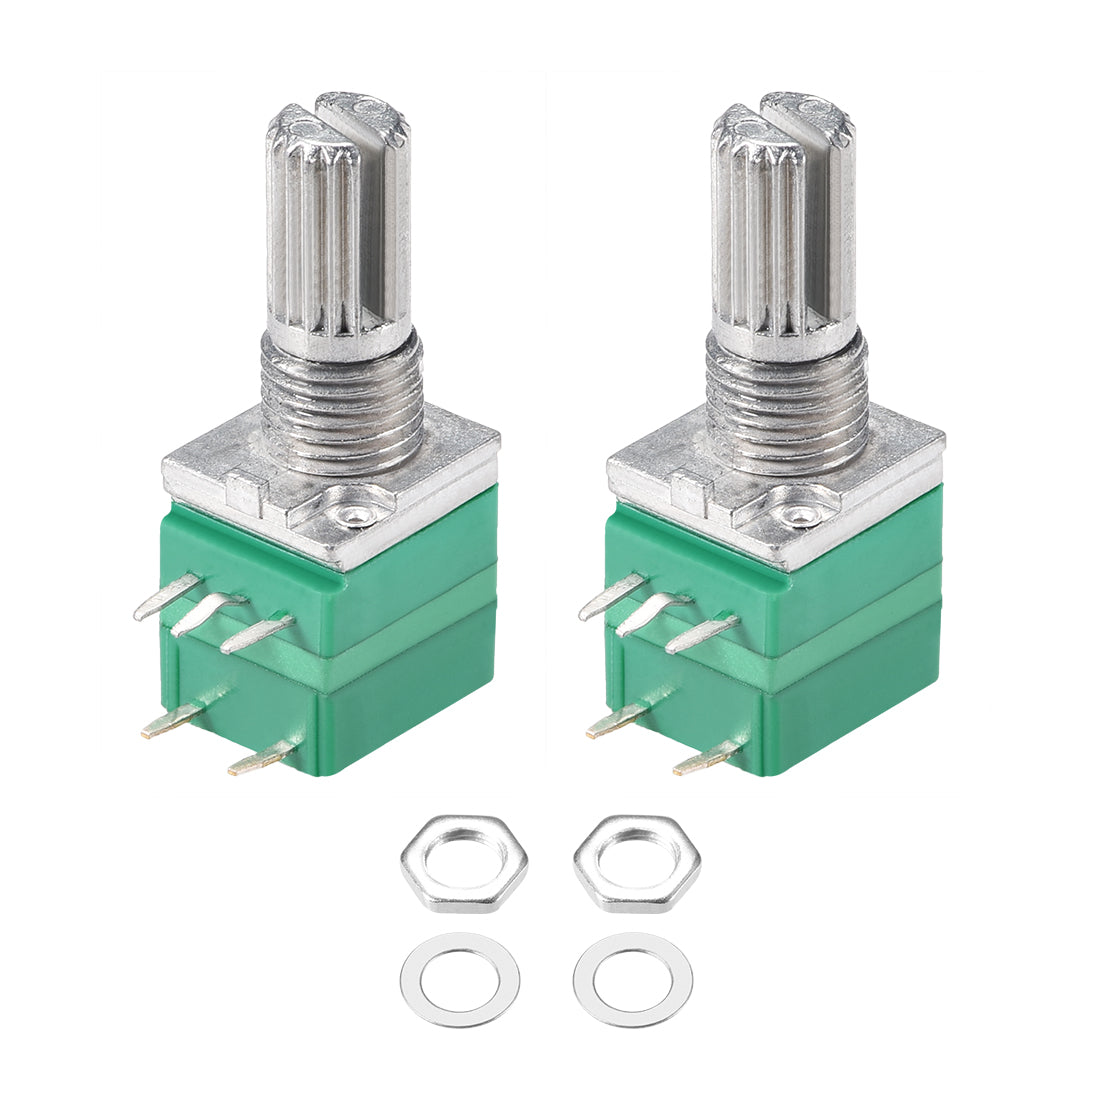 uxcell Uxcell Potentiometer With Switch  B100K Ohm Variable Resistors Single Turn Rotary Carbon Film Taper RV097NS  2pcs